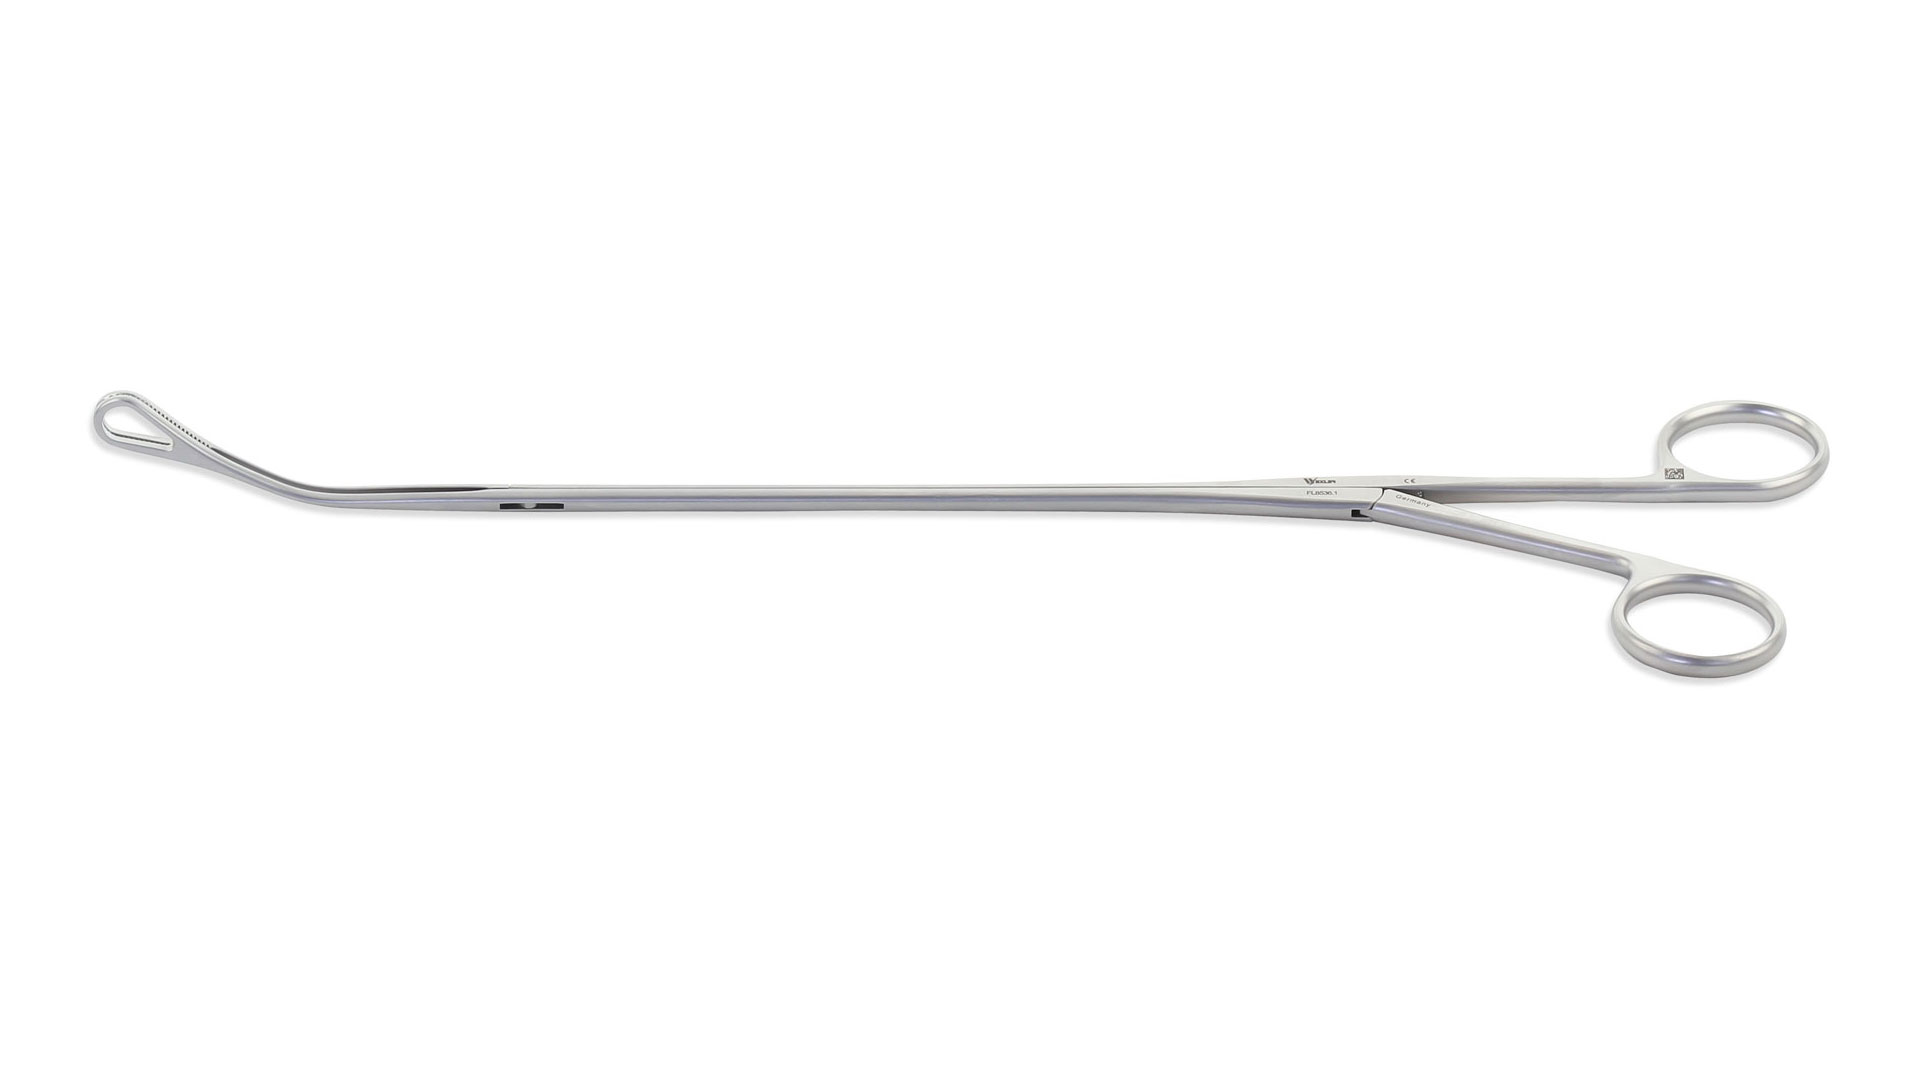 VATS Foerster Forceps - Curved Left 12mm Oval Serrated jaws